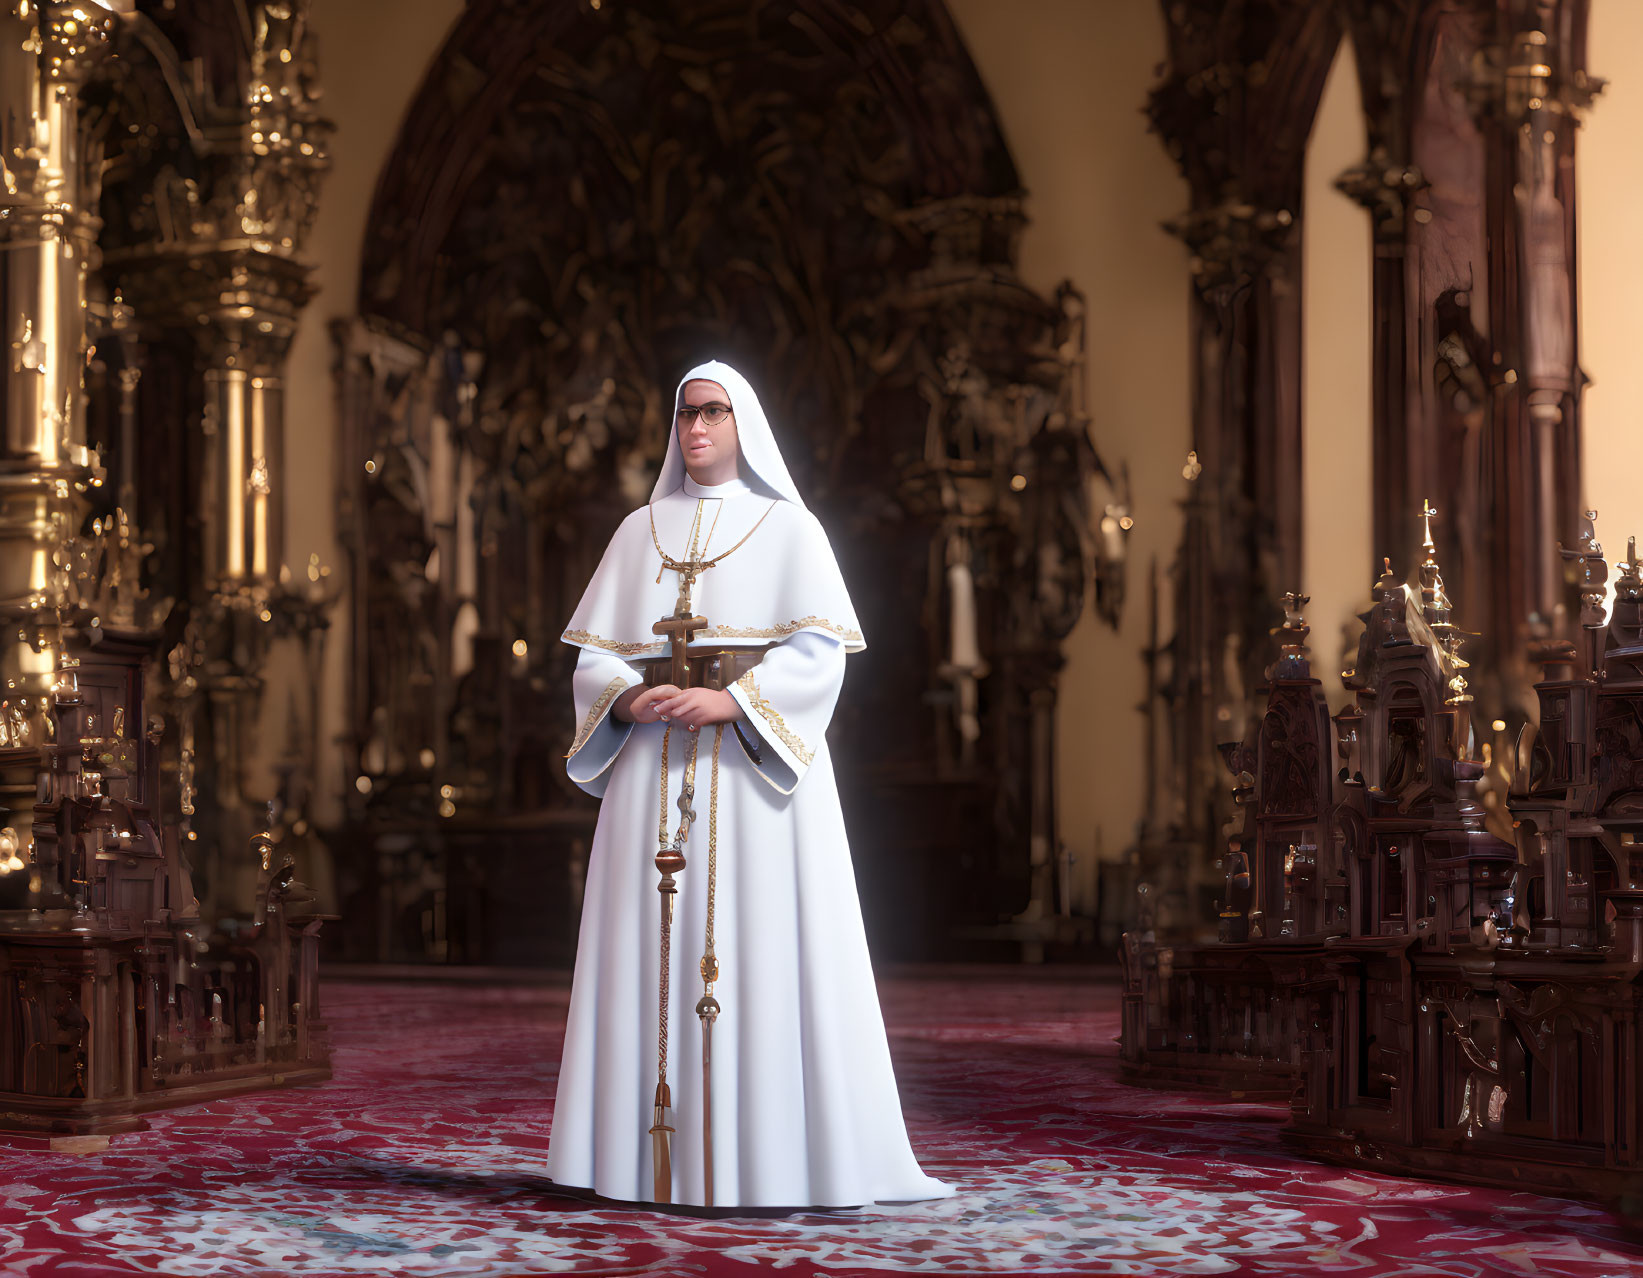 Nun in white habit holding a cross in church with gothic architecture